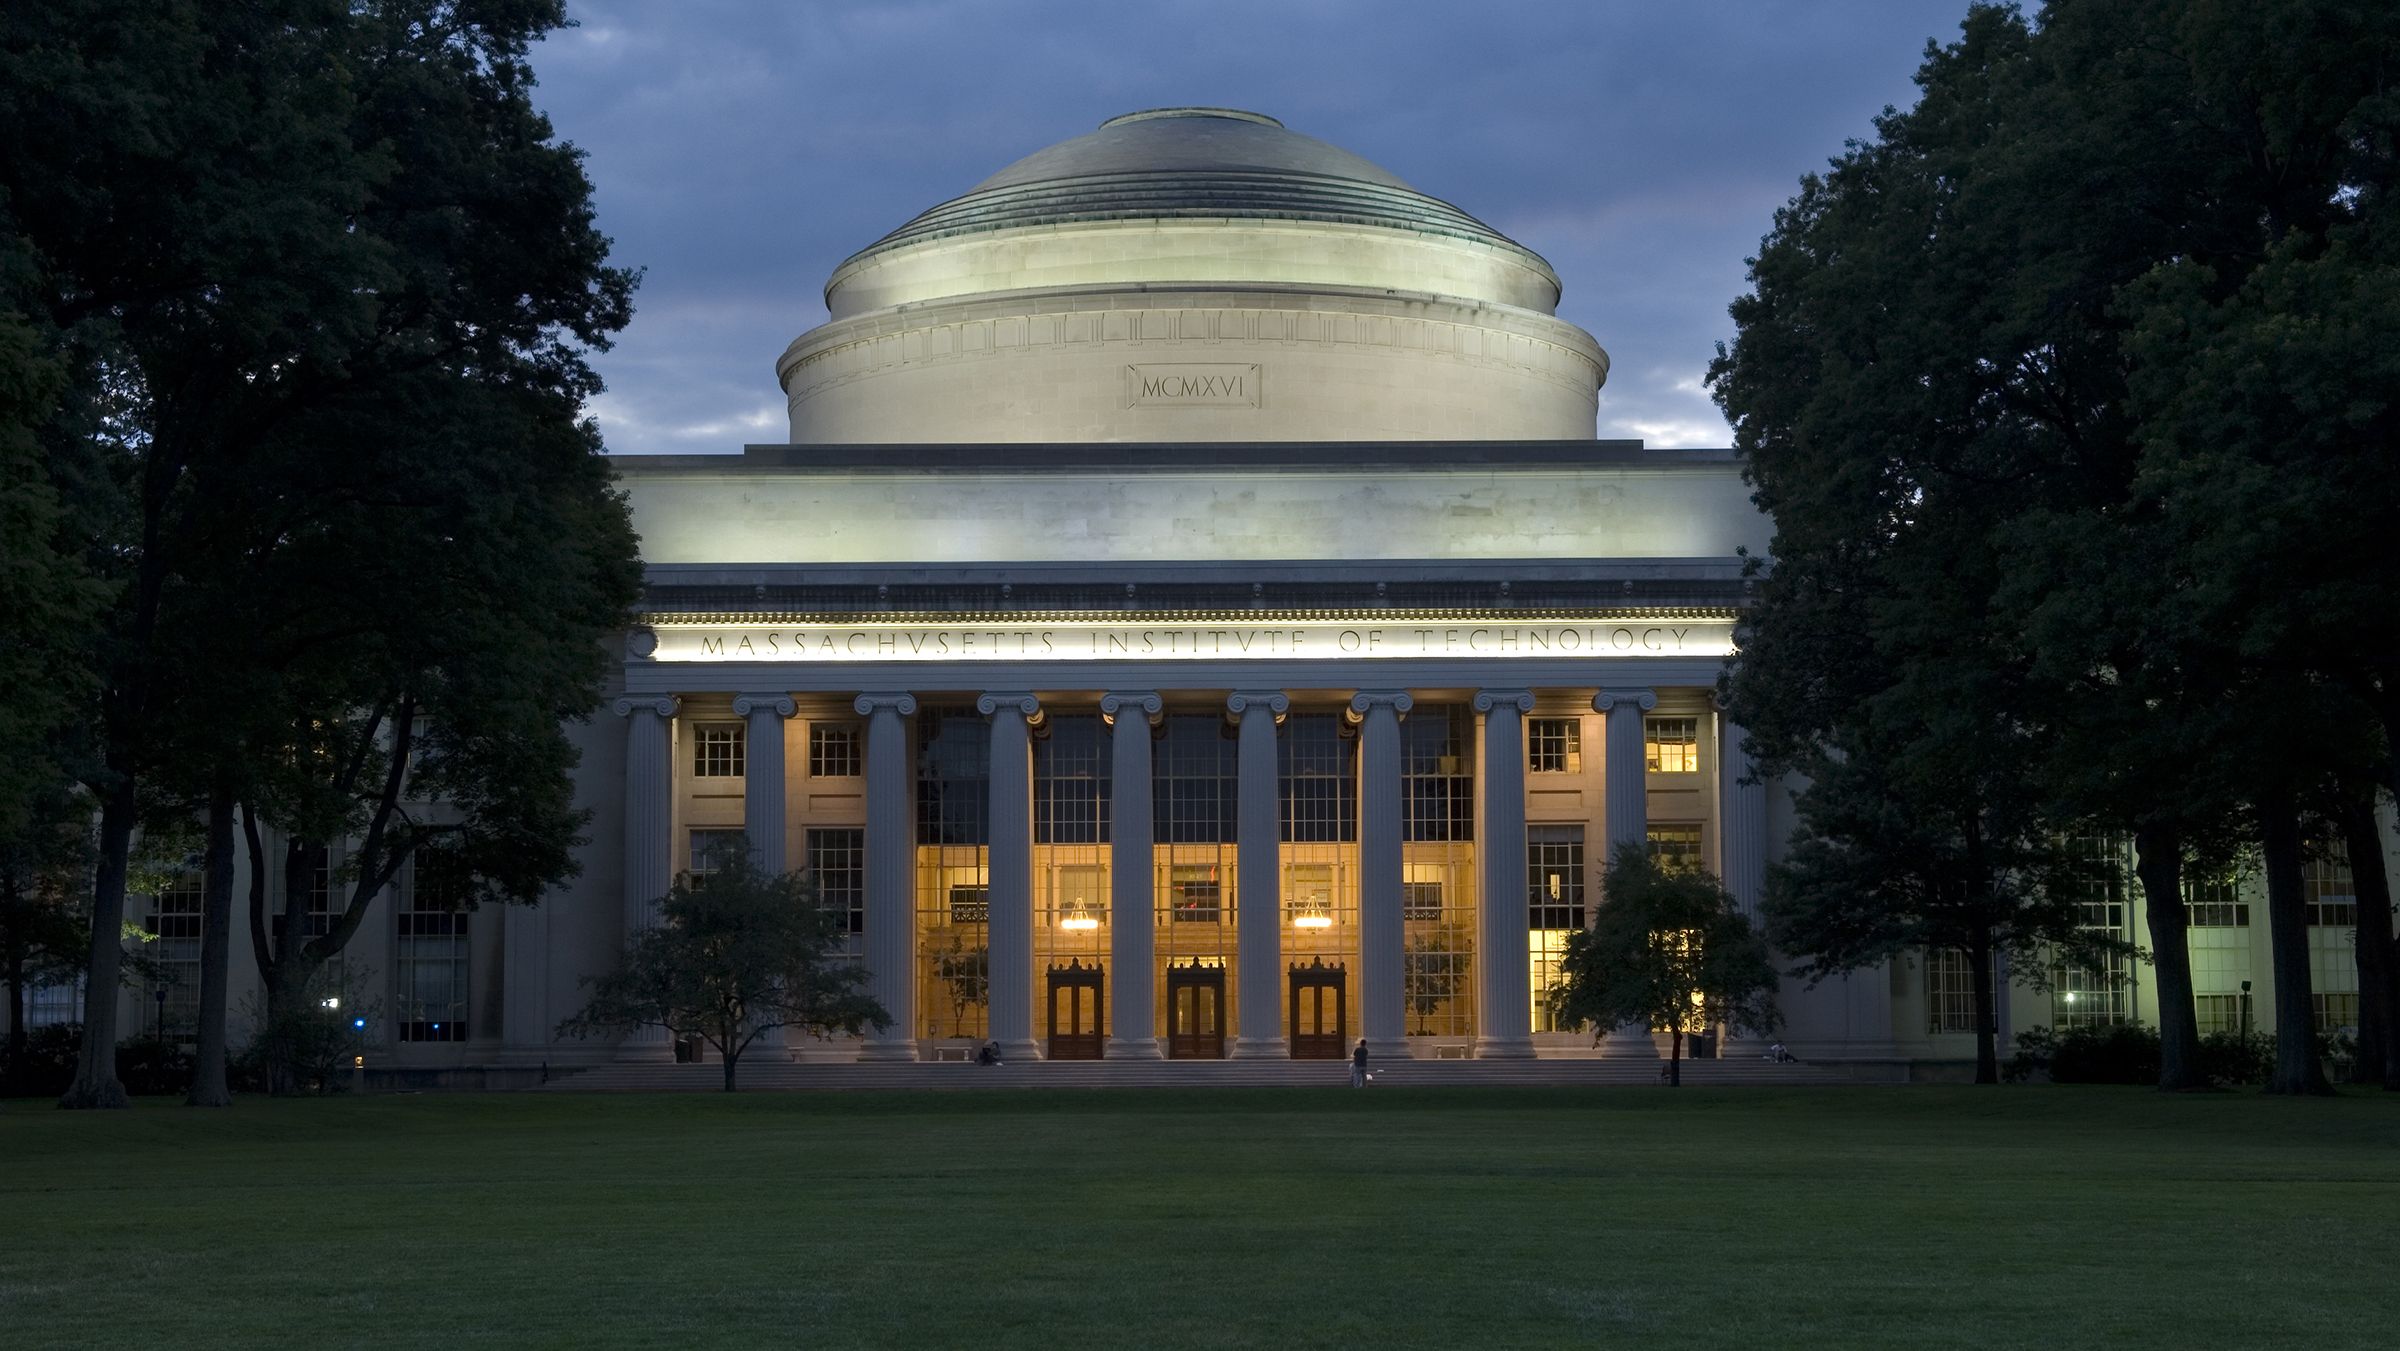 MIT reshapes itself to shape the future | MIT News | Massachusetts Institute of Technology